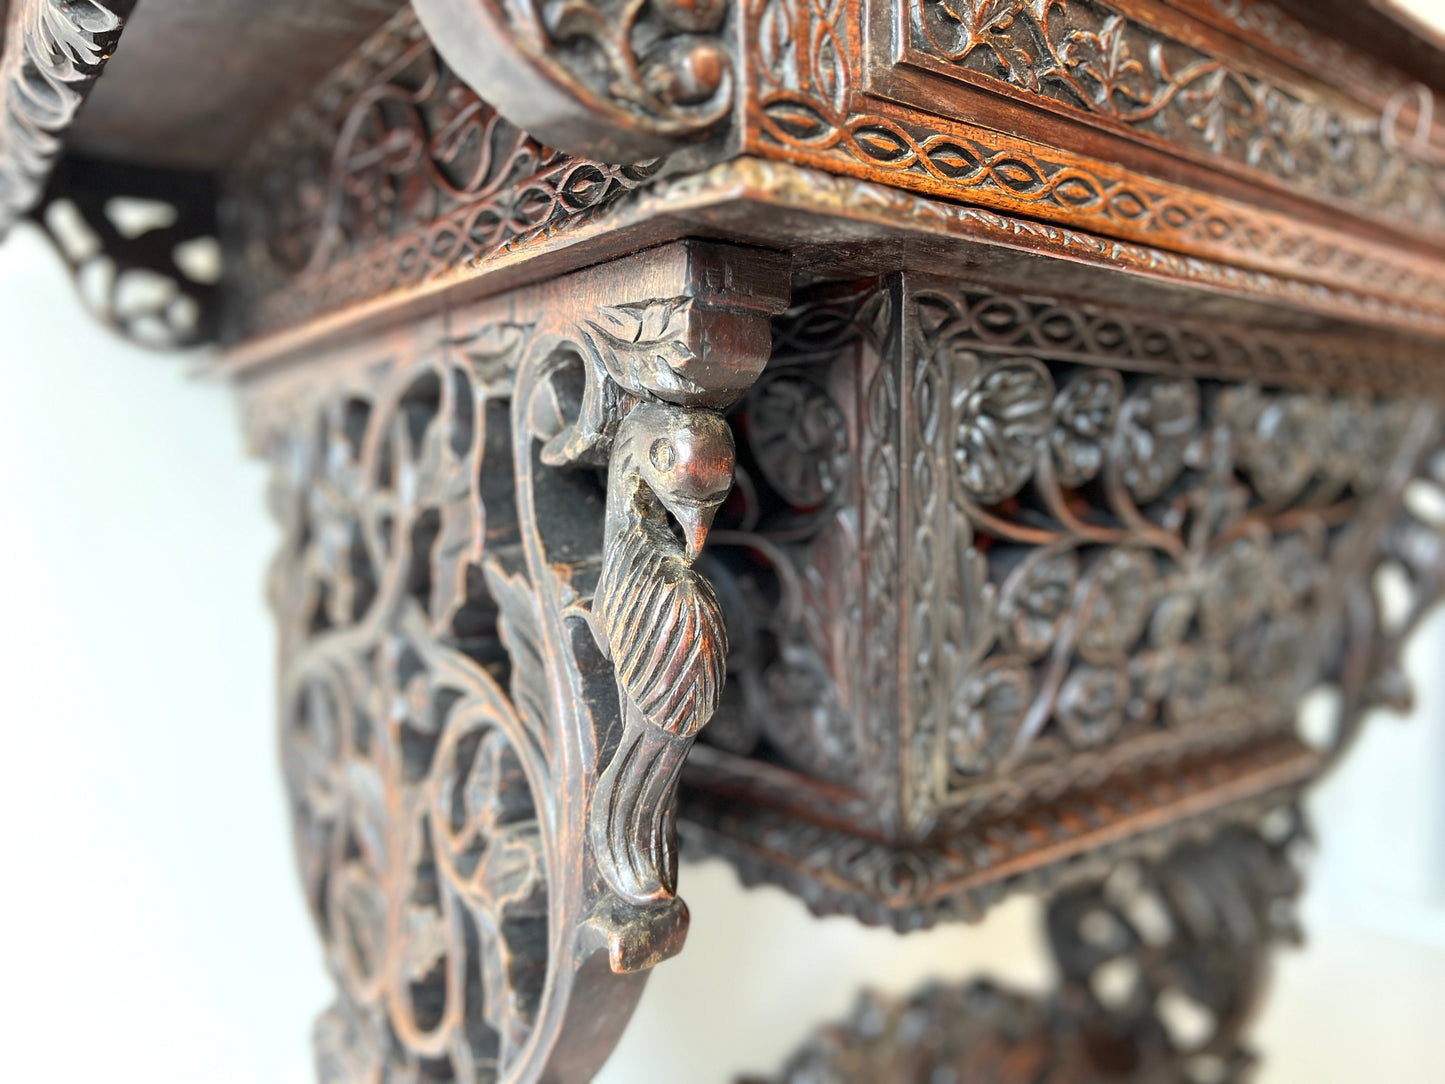 19th Century Anglo-Indian Carved Rosewood Writing Desk